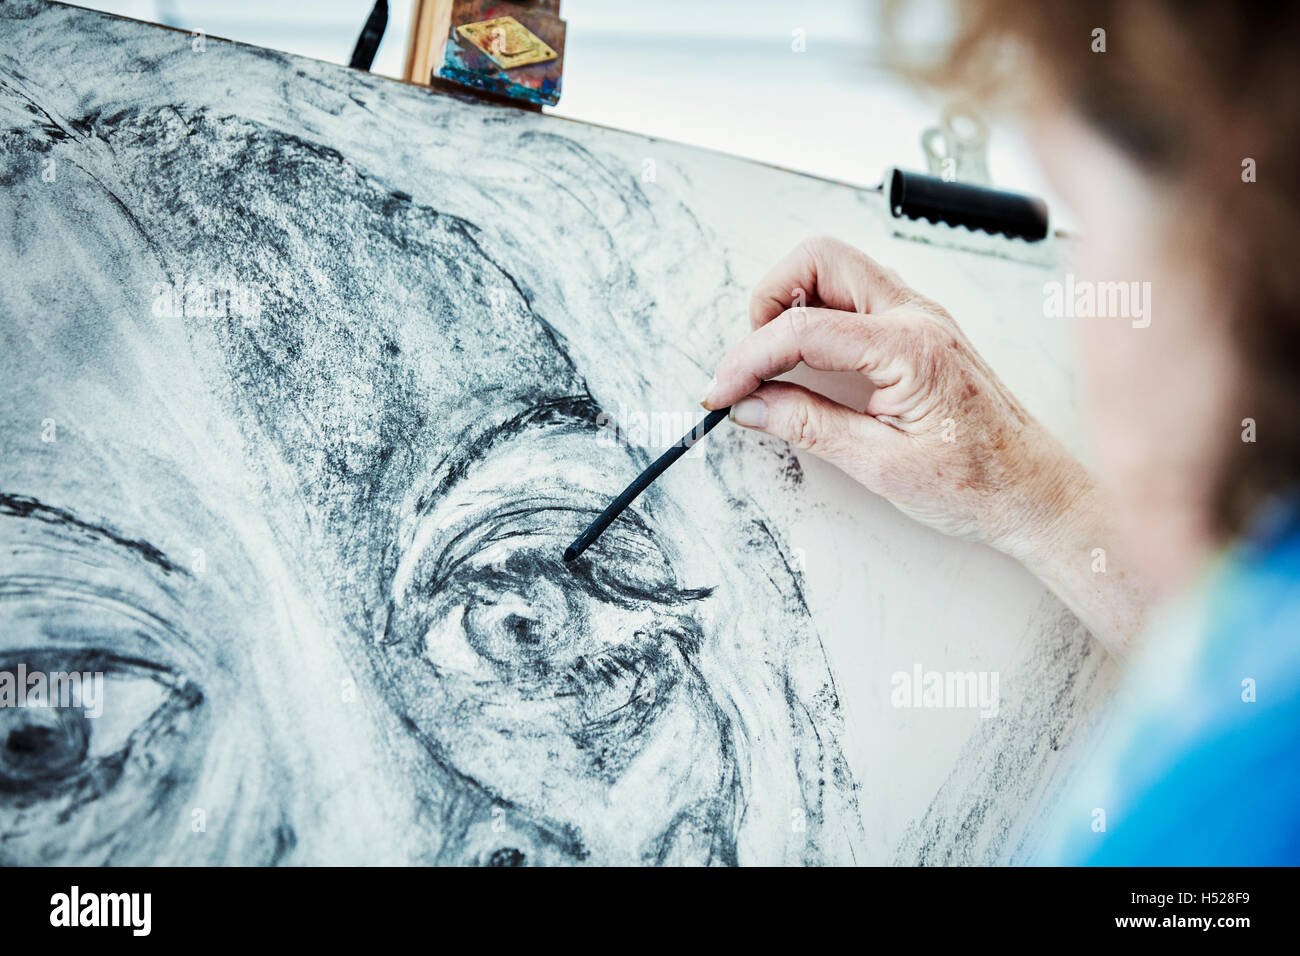 An artist working at her easel, drawing with charcoal on paper Stock Photo